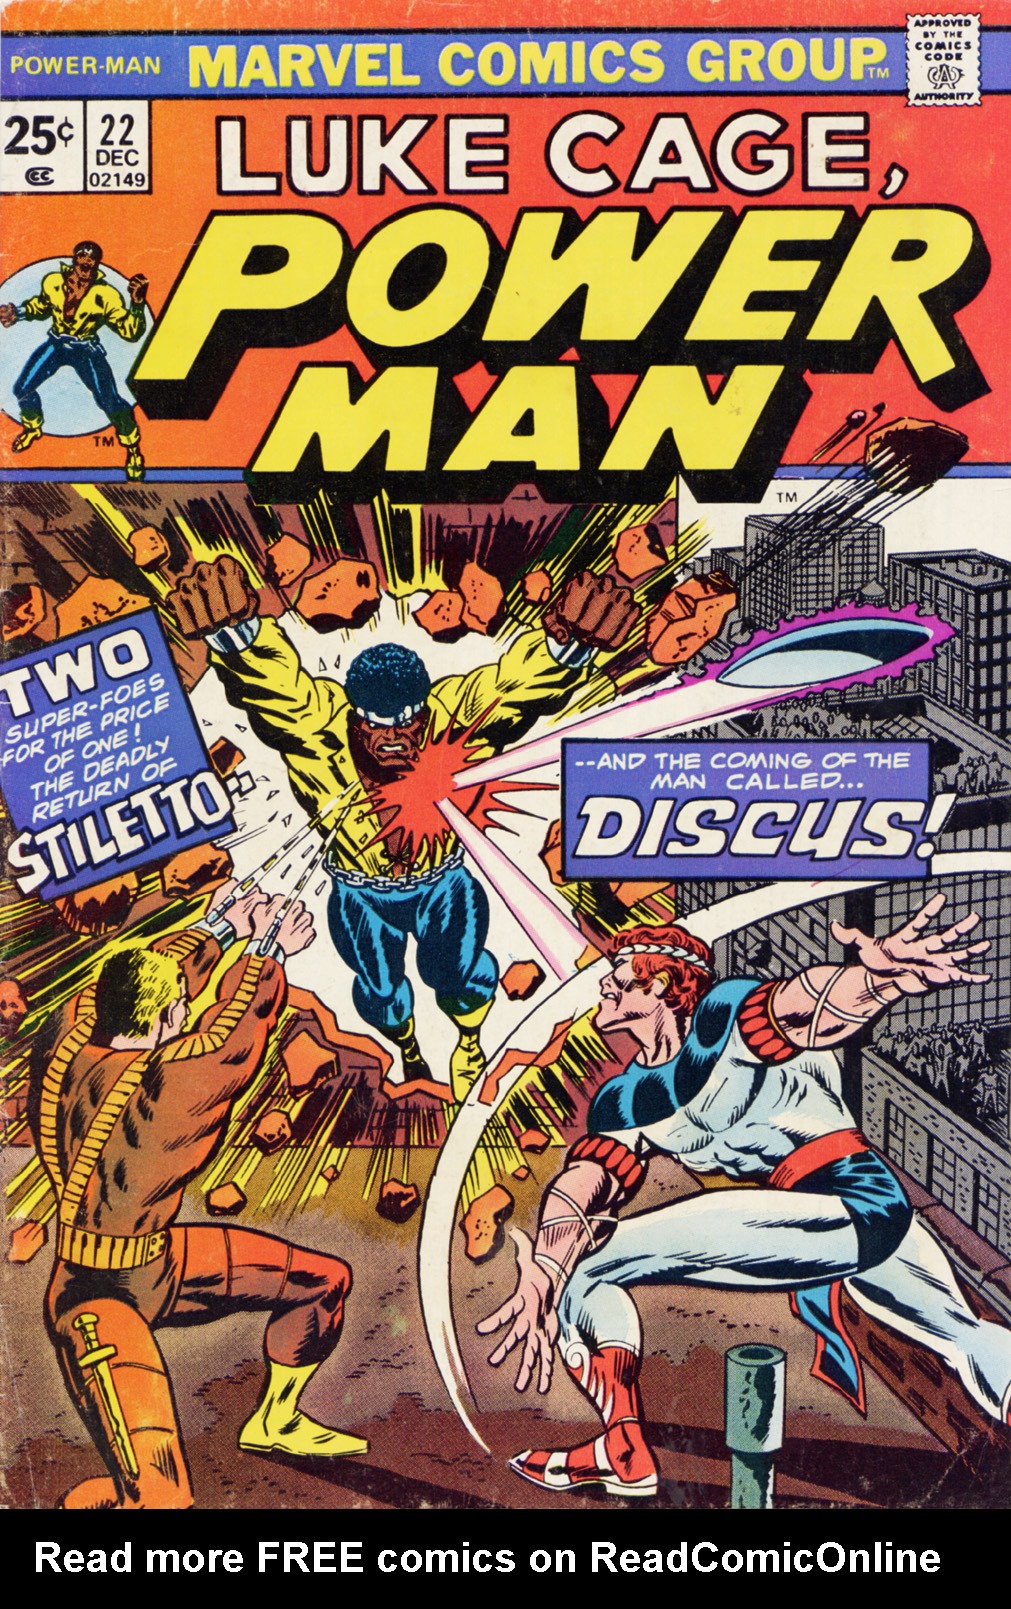 Read online Power Man comic -  Issue #22 - 1